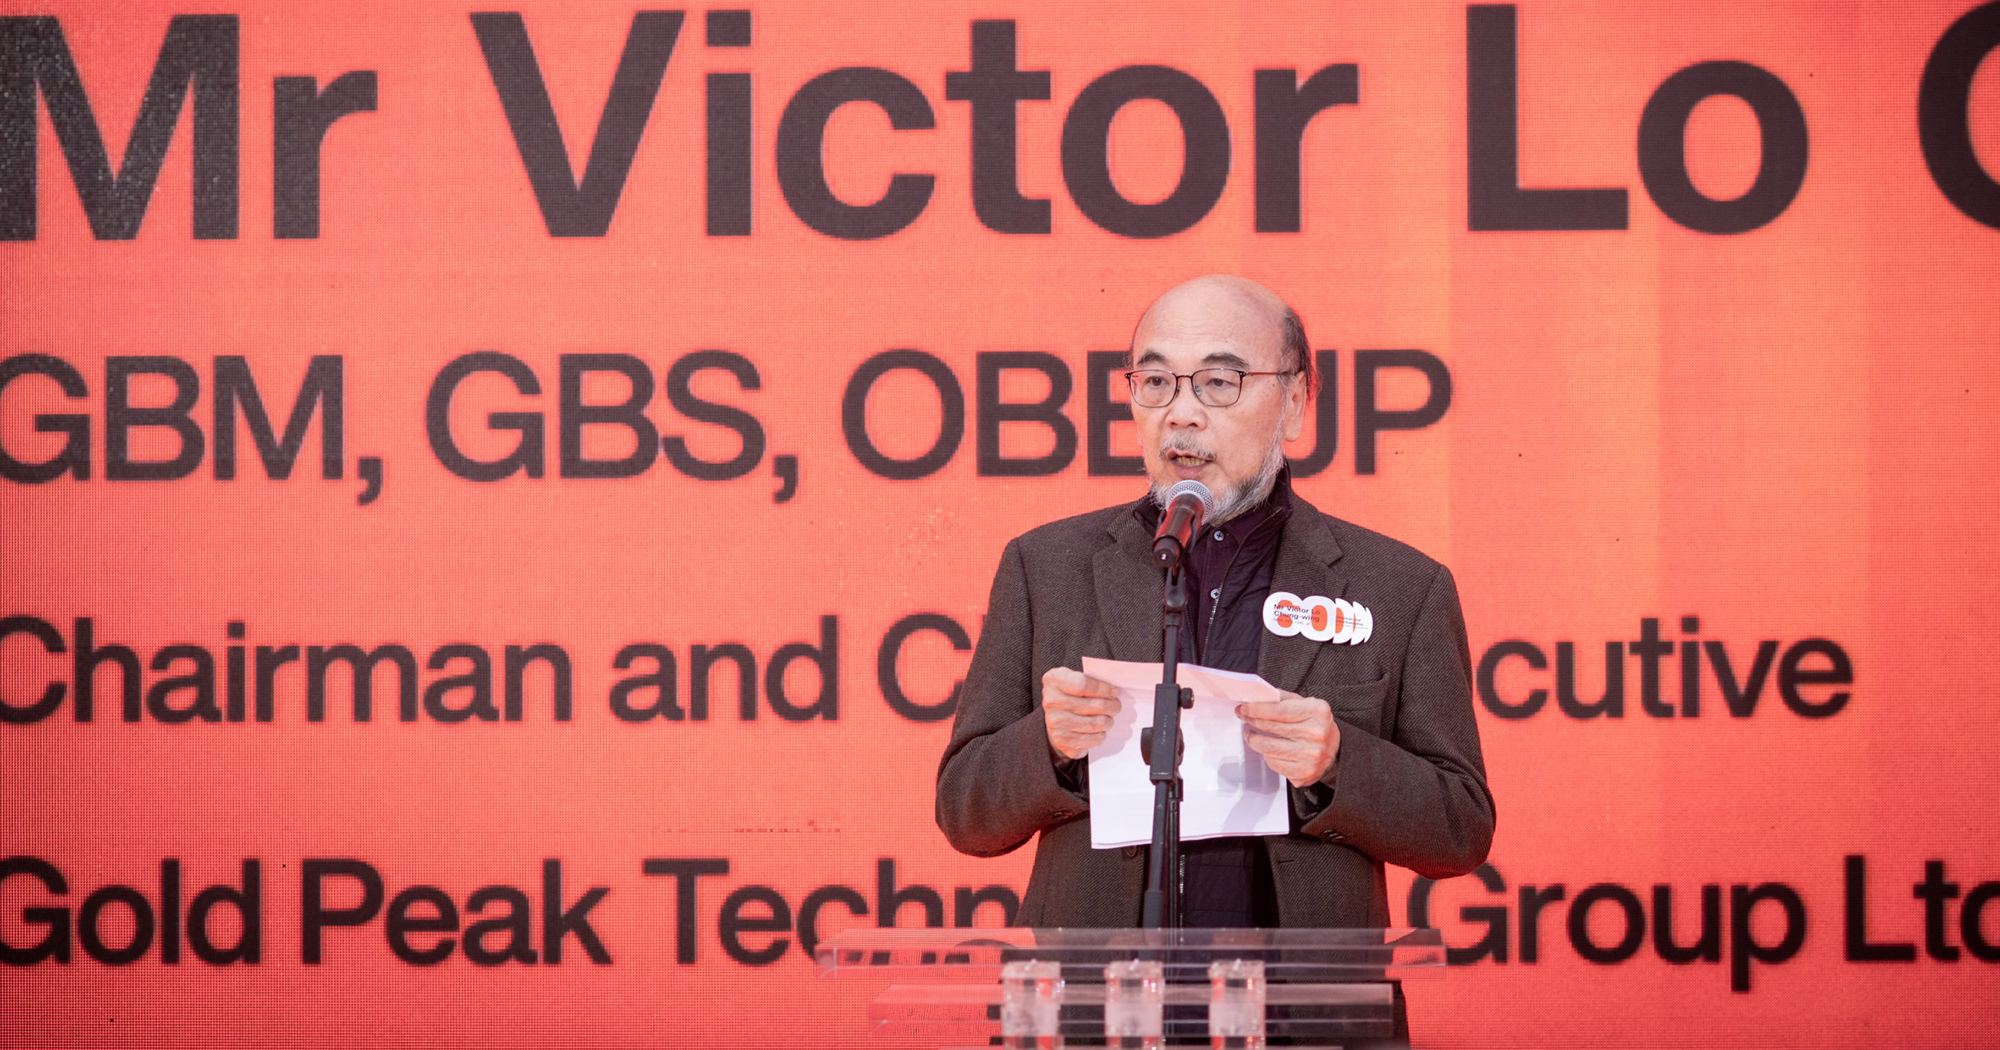 Mr Victor LO, Chairman and Chief Executive Gold Peak Technology Group Ltd.